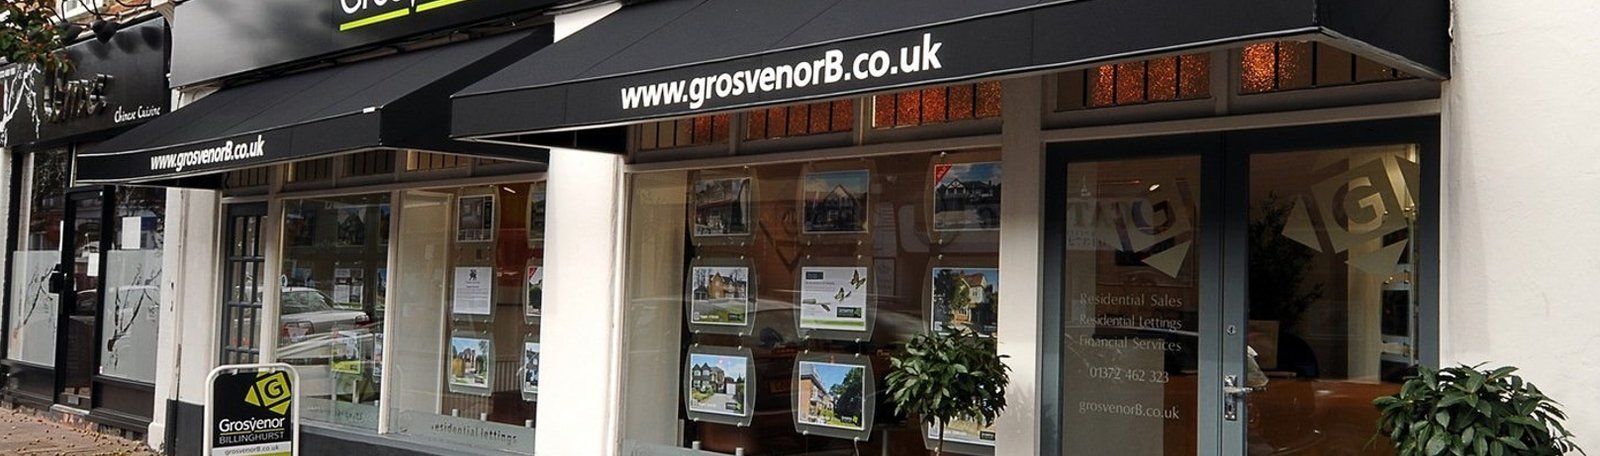 grosvenor’s claygate office